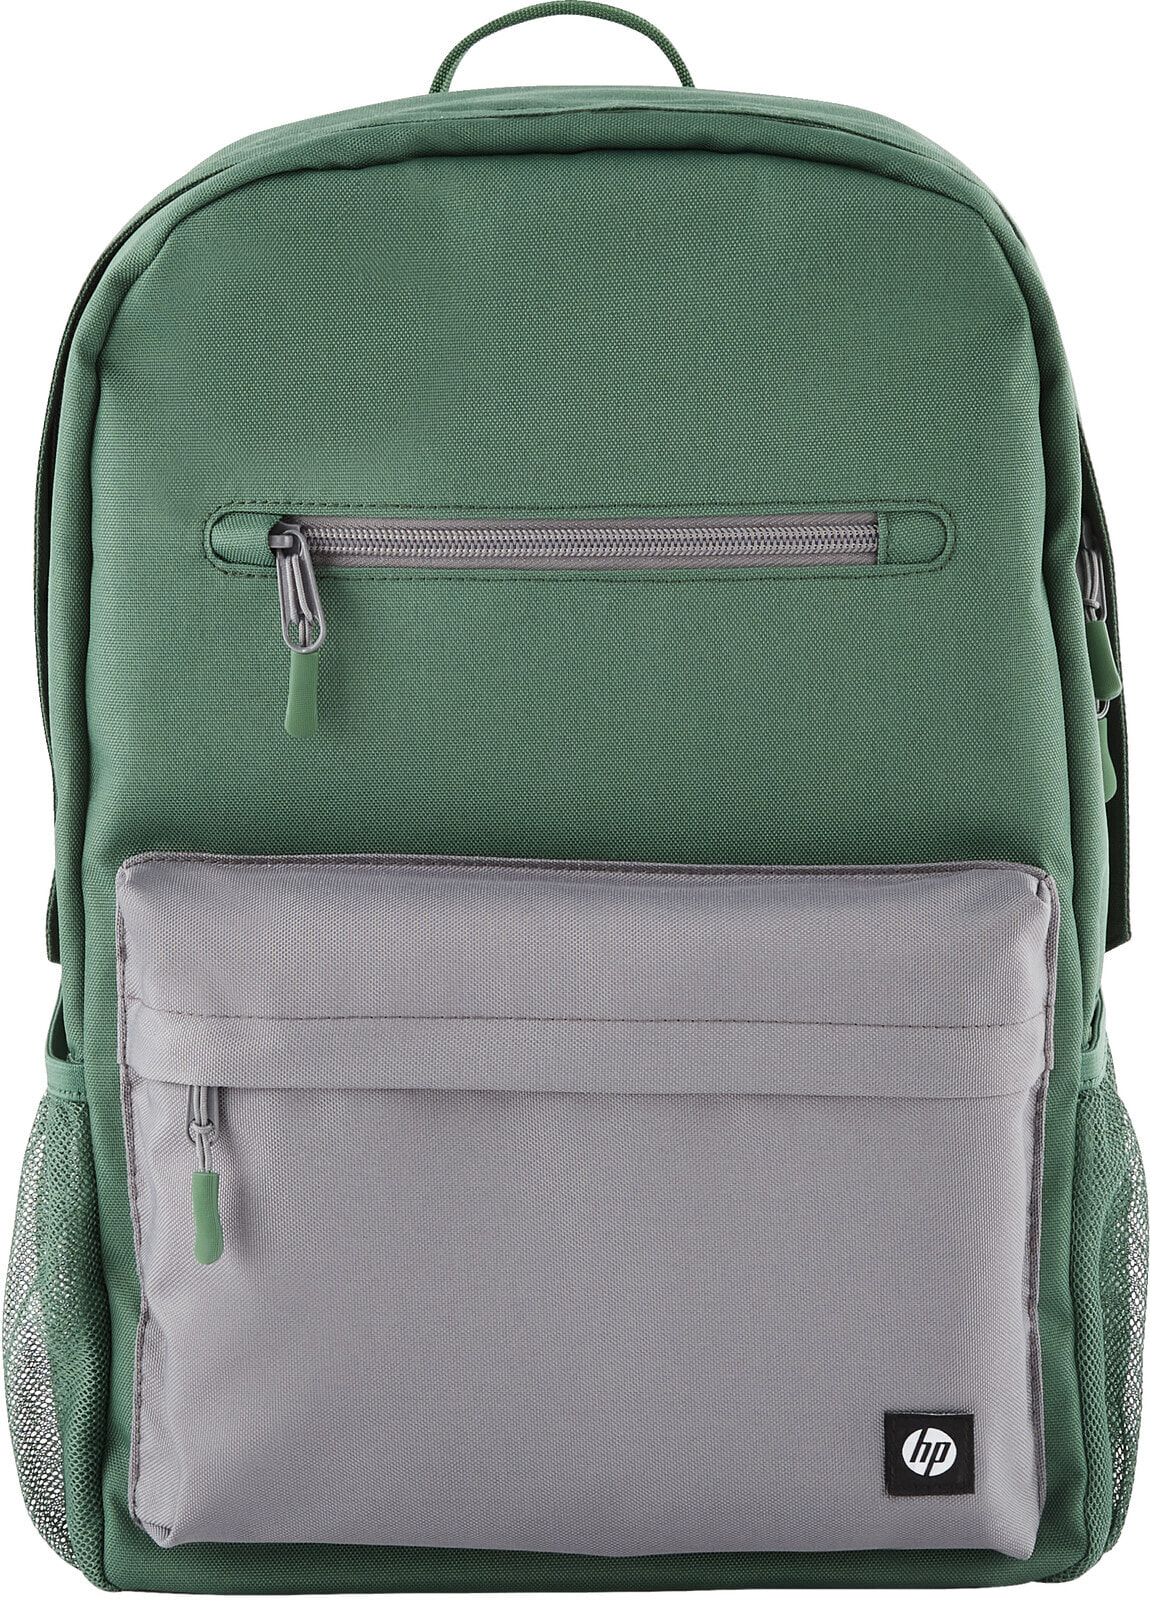 HP Campus Green Backpack P